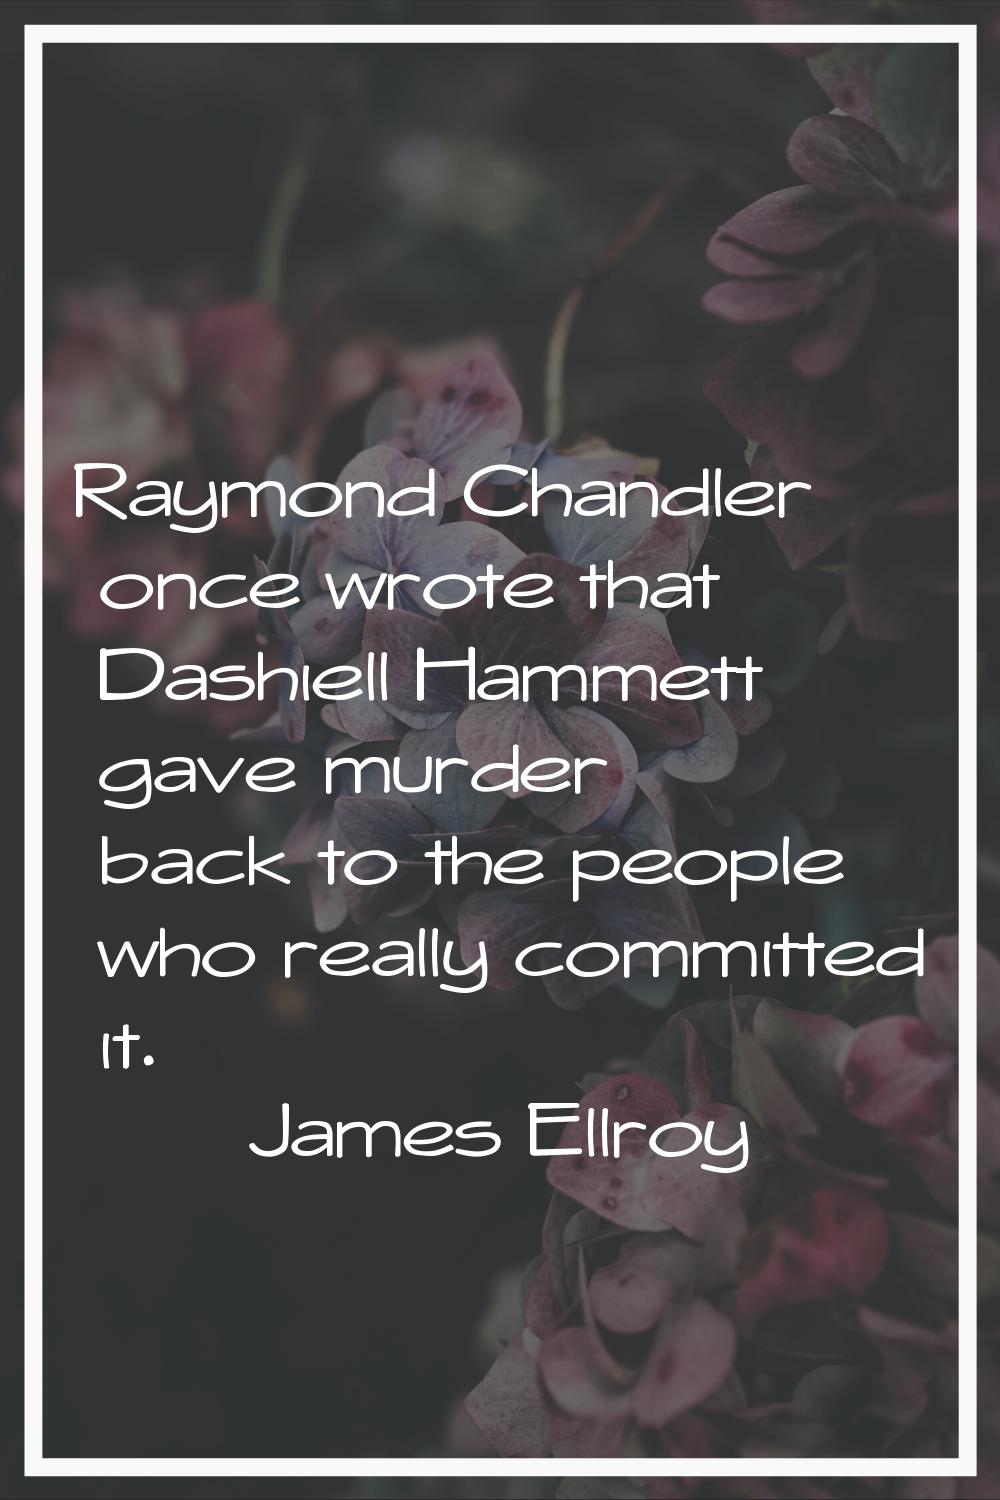 Raymond Chandler once wrote that Dashiell Hammett gave murder back to the people who really committ